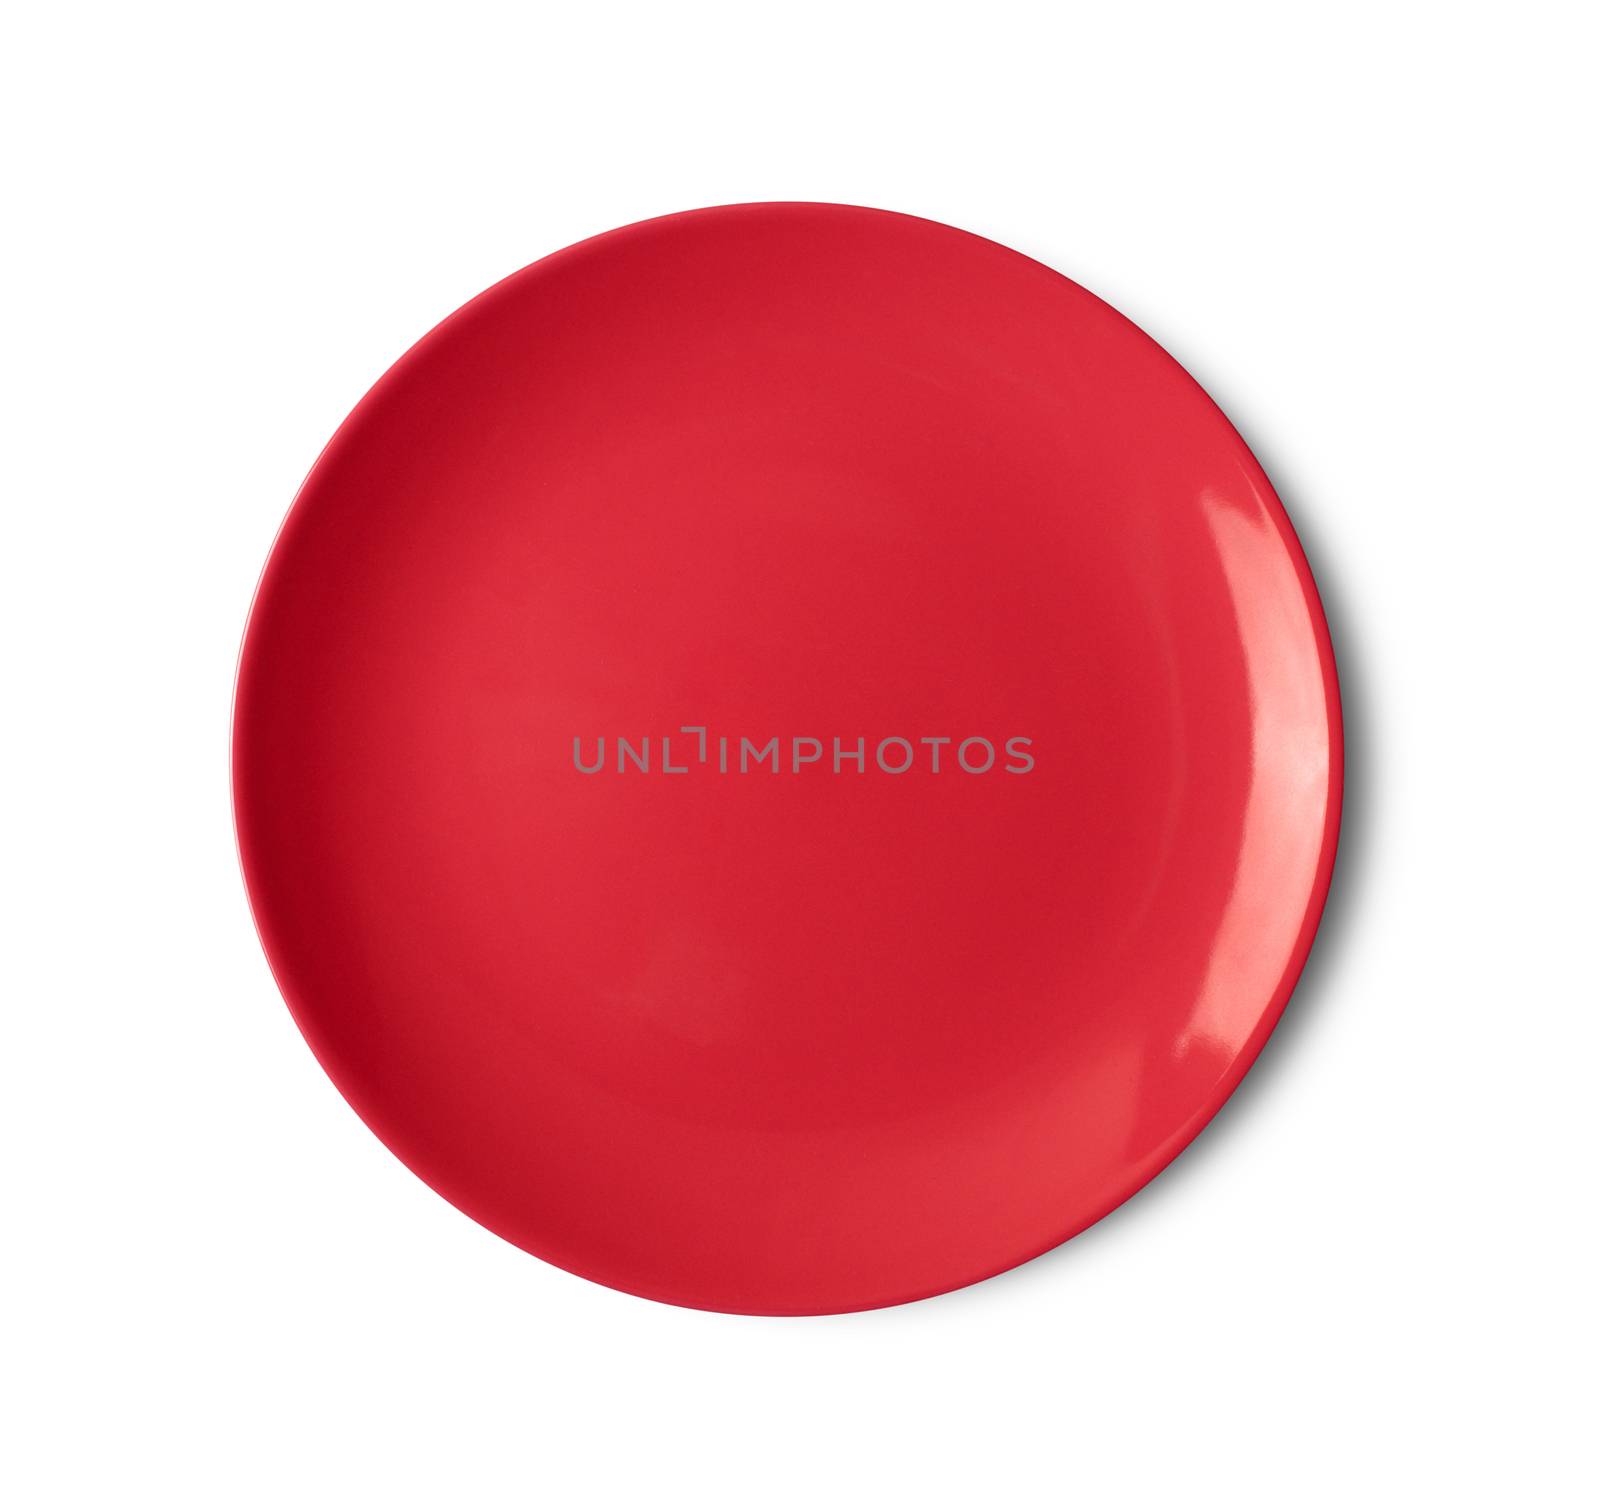 red plate on white background